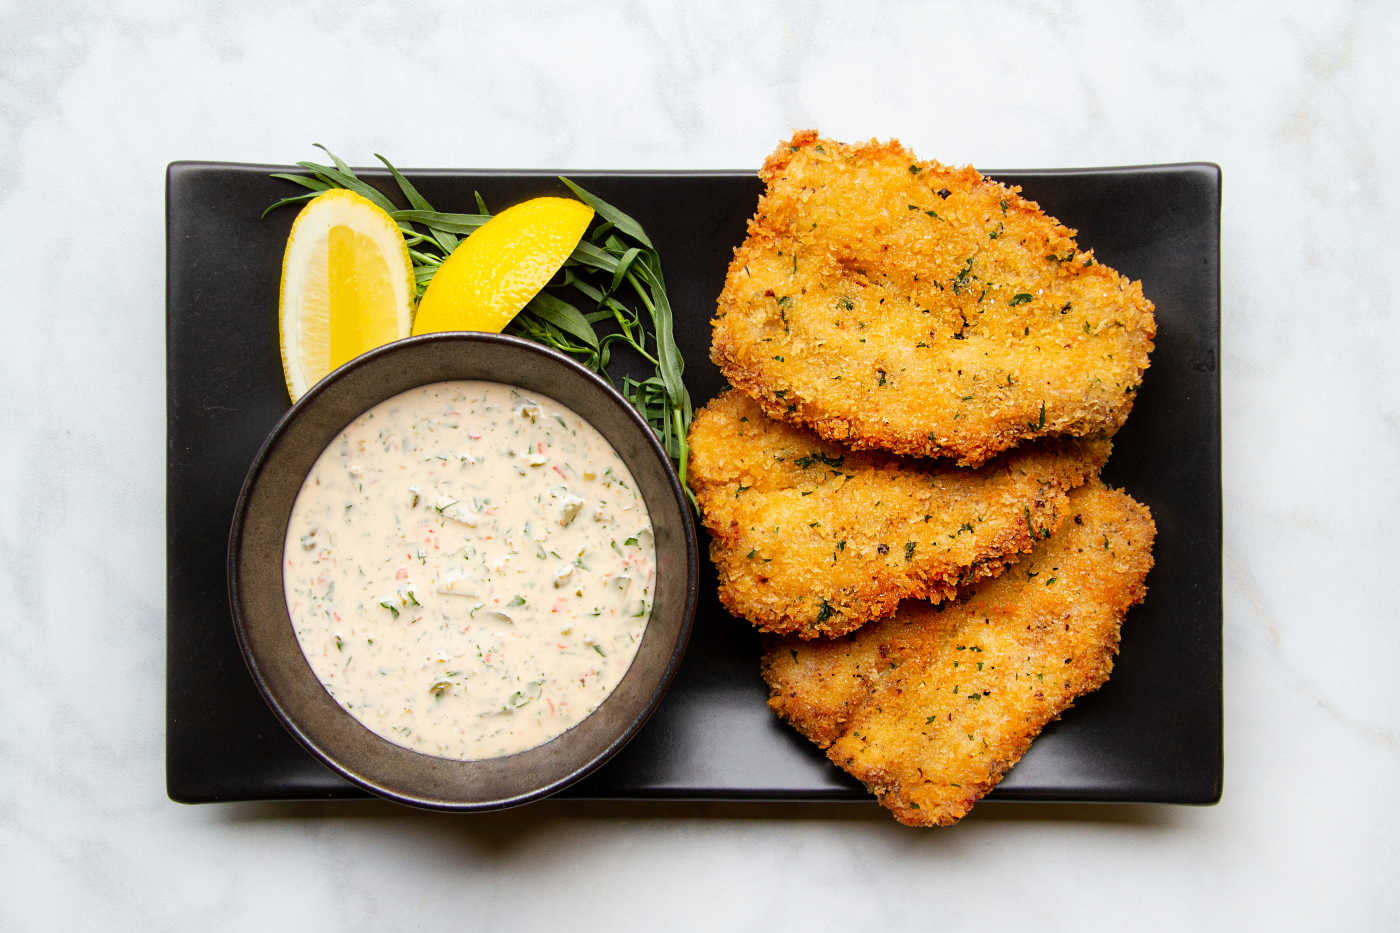 BREADED SARDINE FILLETS WITH SPICY REMOULADE SAUCE